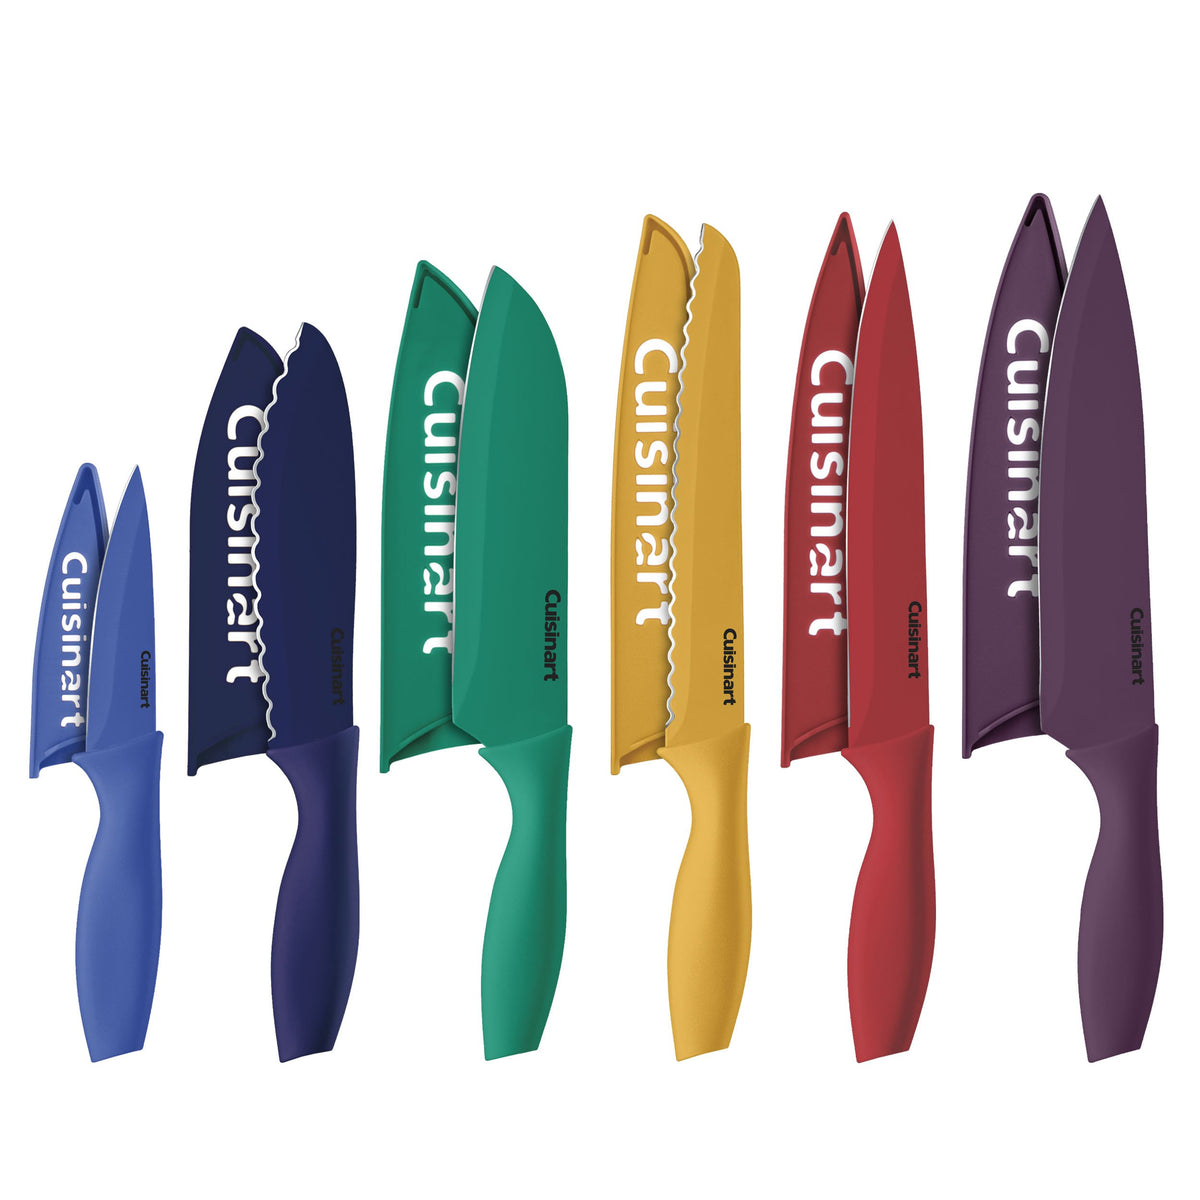 Cuisinart C55-10PCPL Ceramic Coated Knife Set with Blade Guard Sheaths (10- Piece Set) in Pastel Bright's